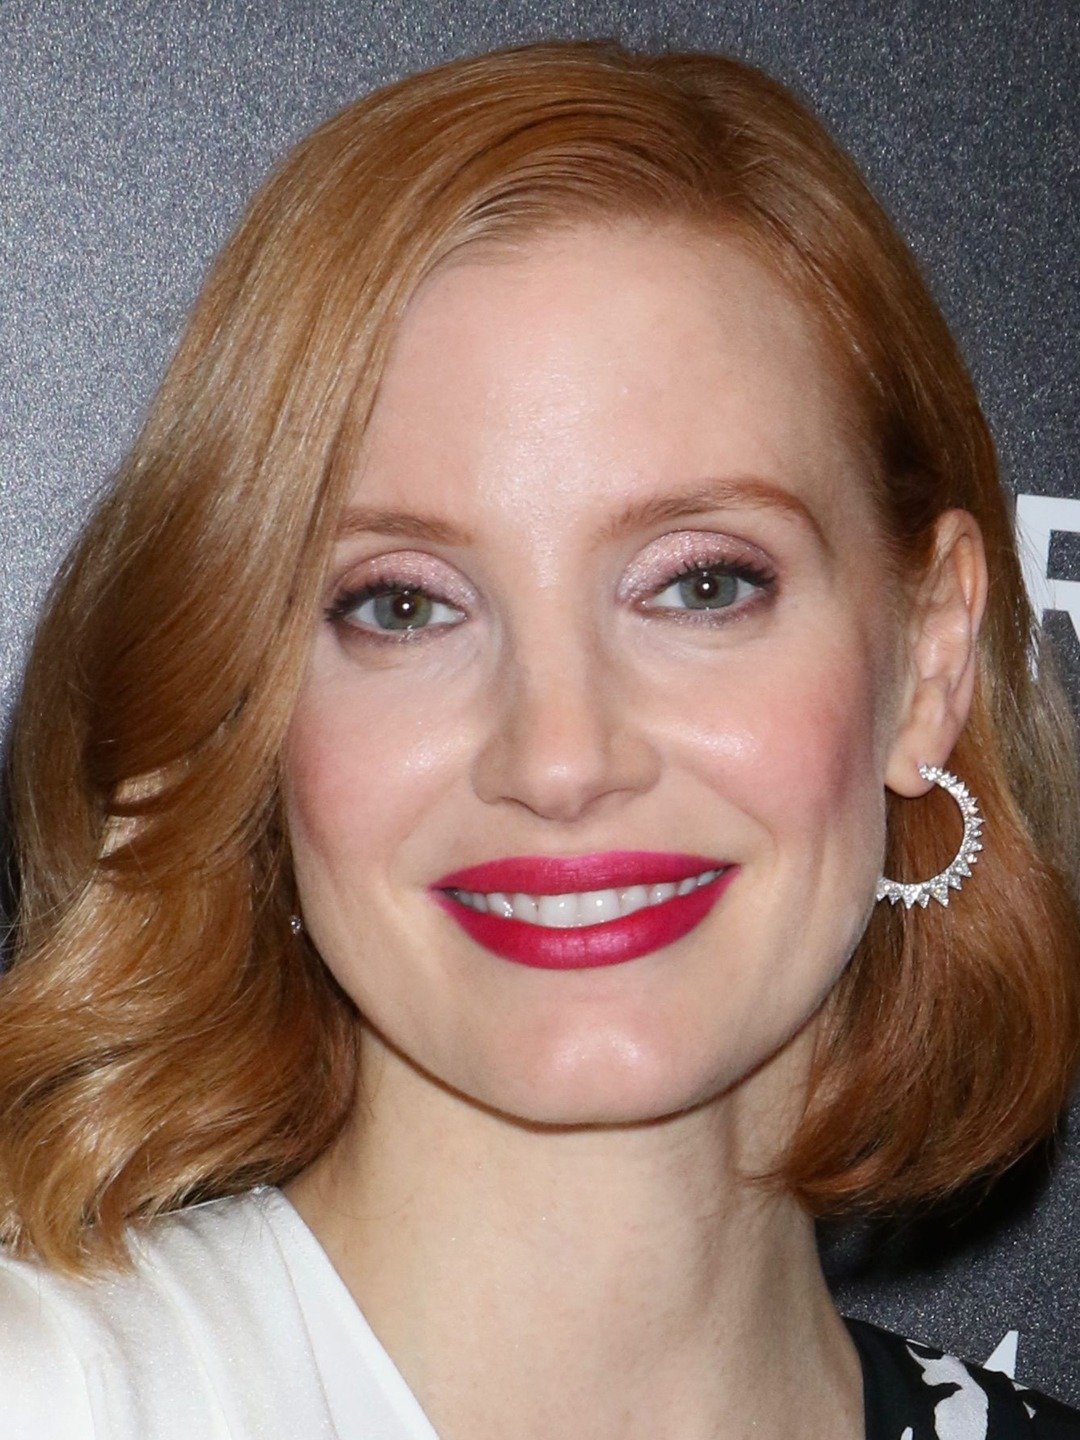 How tall is Jessica Chastain?